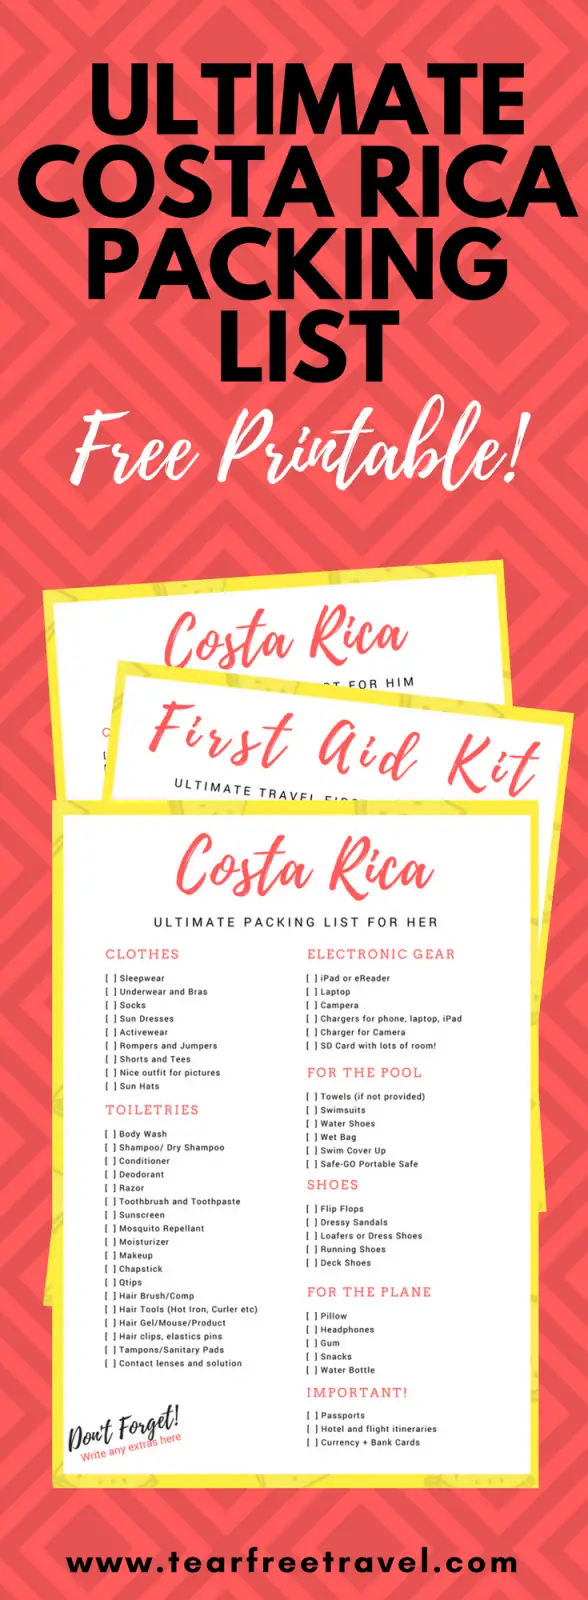 Are you planning a trip to Costa Rica? Check out my ultimate Costa Rica packing list here. If you are planning a Costa Rica vacation, I have the ultimate beach vacation packing list here. Lots of Costa Rica outfit inspiration. Included is a detailed toiletry packing list, travel first aid kit checklist and a packing list for her and a packing list for him. Everything you need for a great vacation to Costa Rica. #costarica #packinglist #travelpacking #vacation #beachvacation #outfitideas